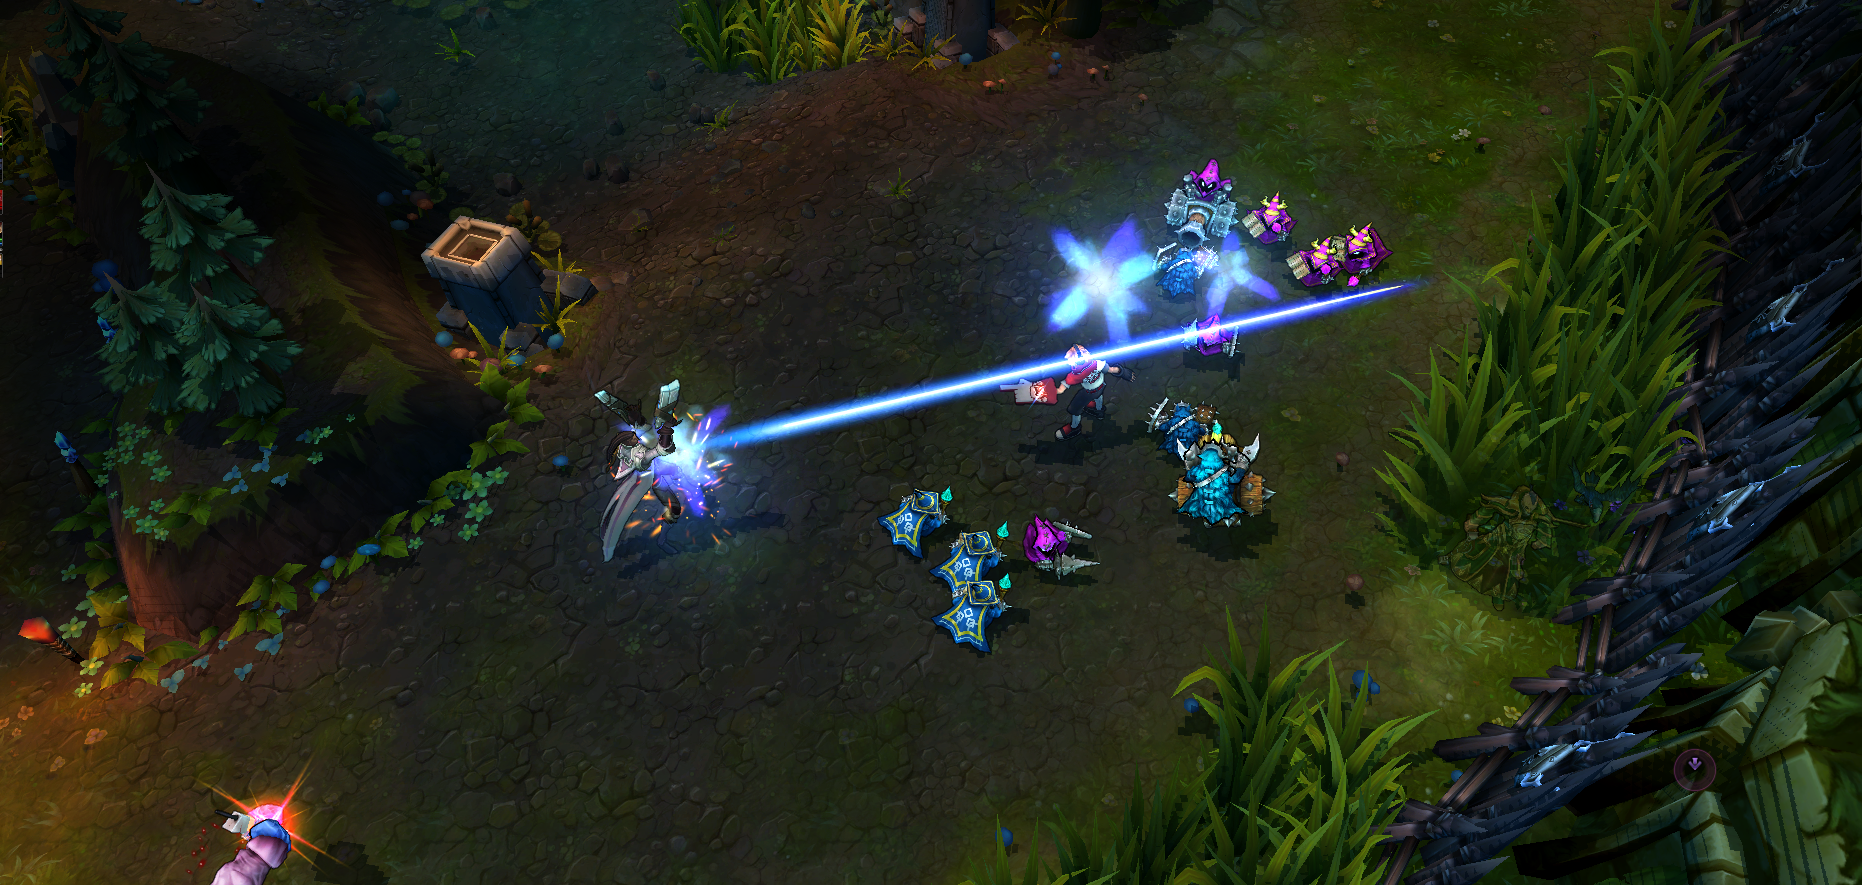 Geek insider, geekinsider, geekinsider. Com,, league of legends: lucian impressions, gaming